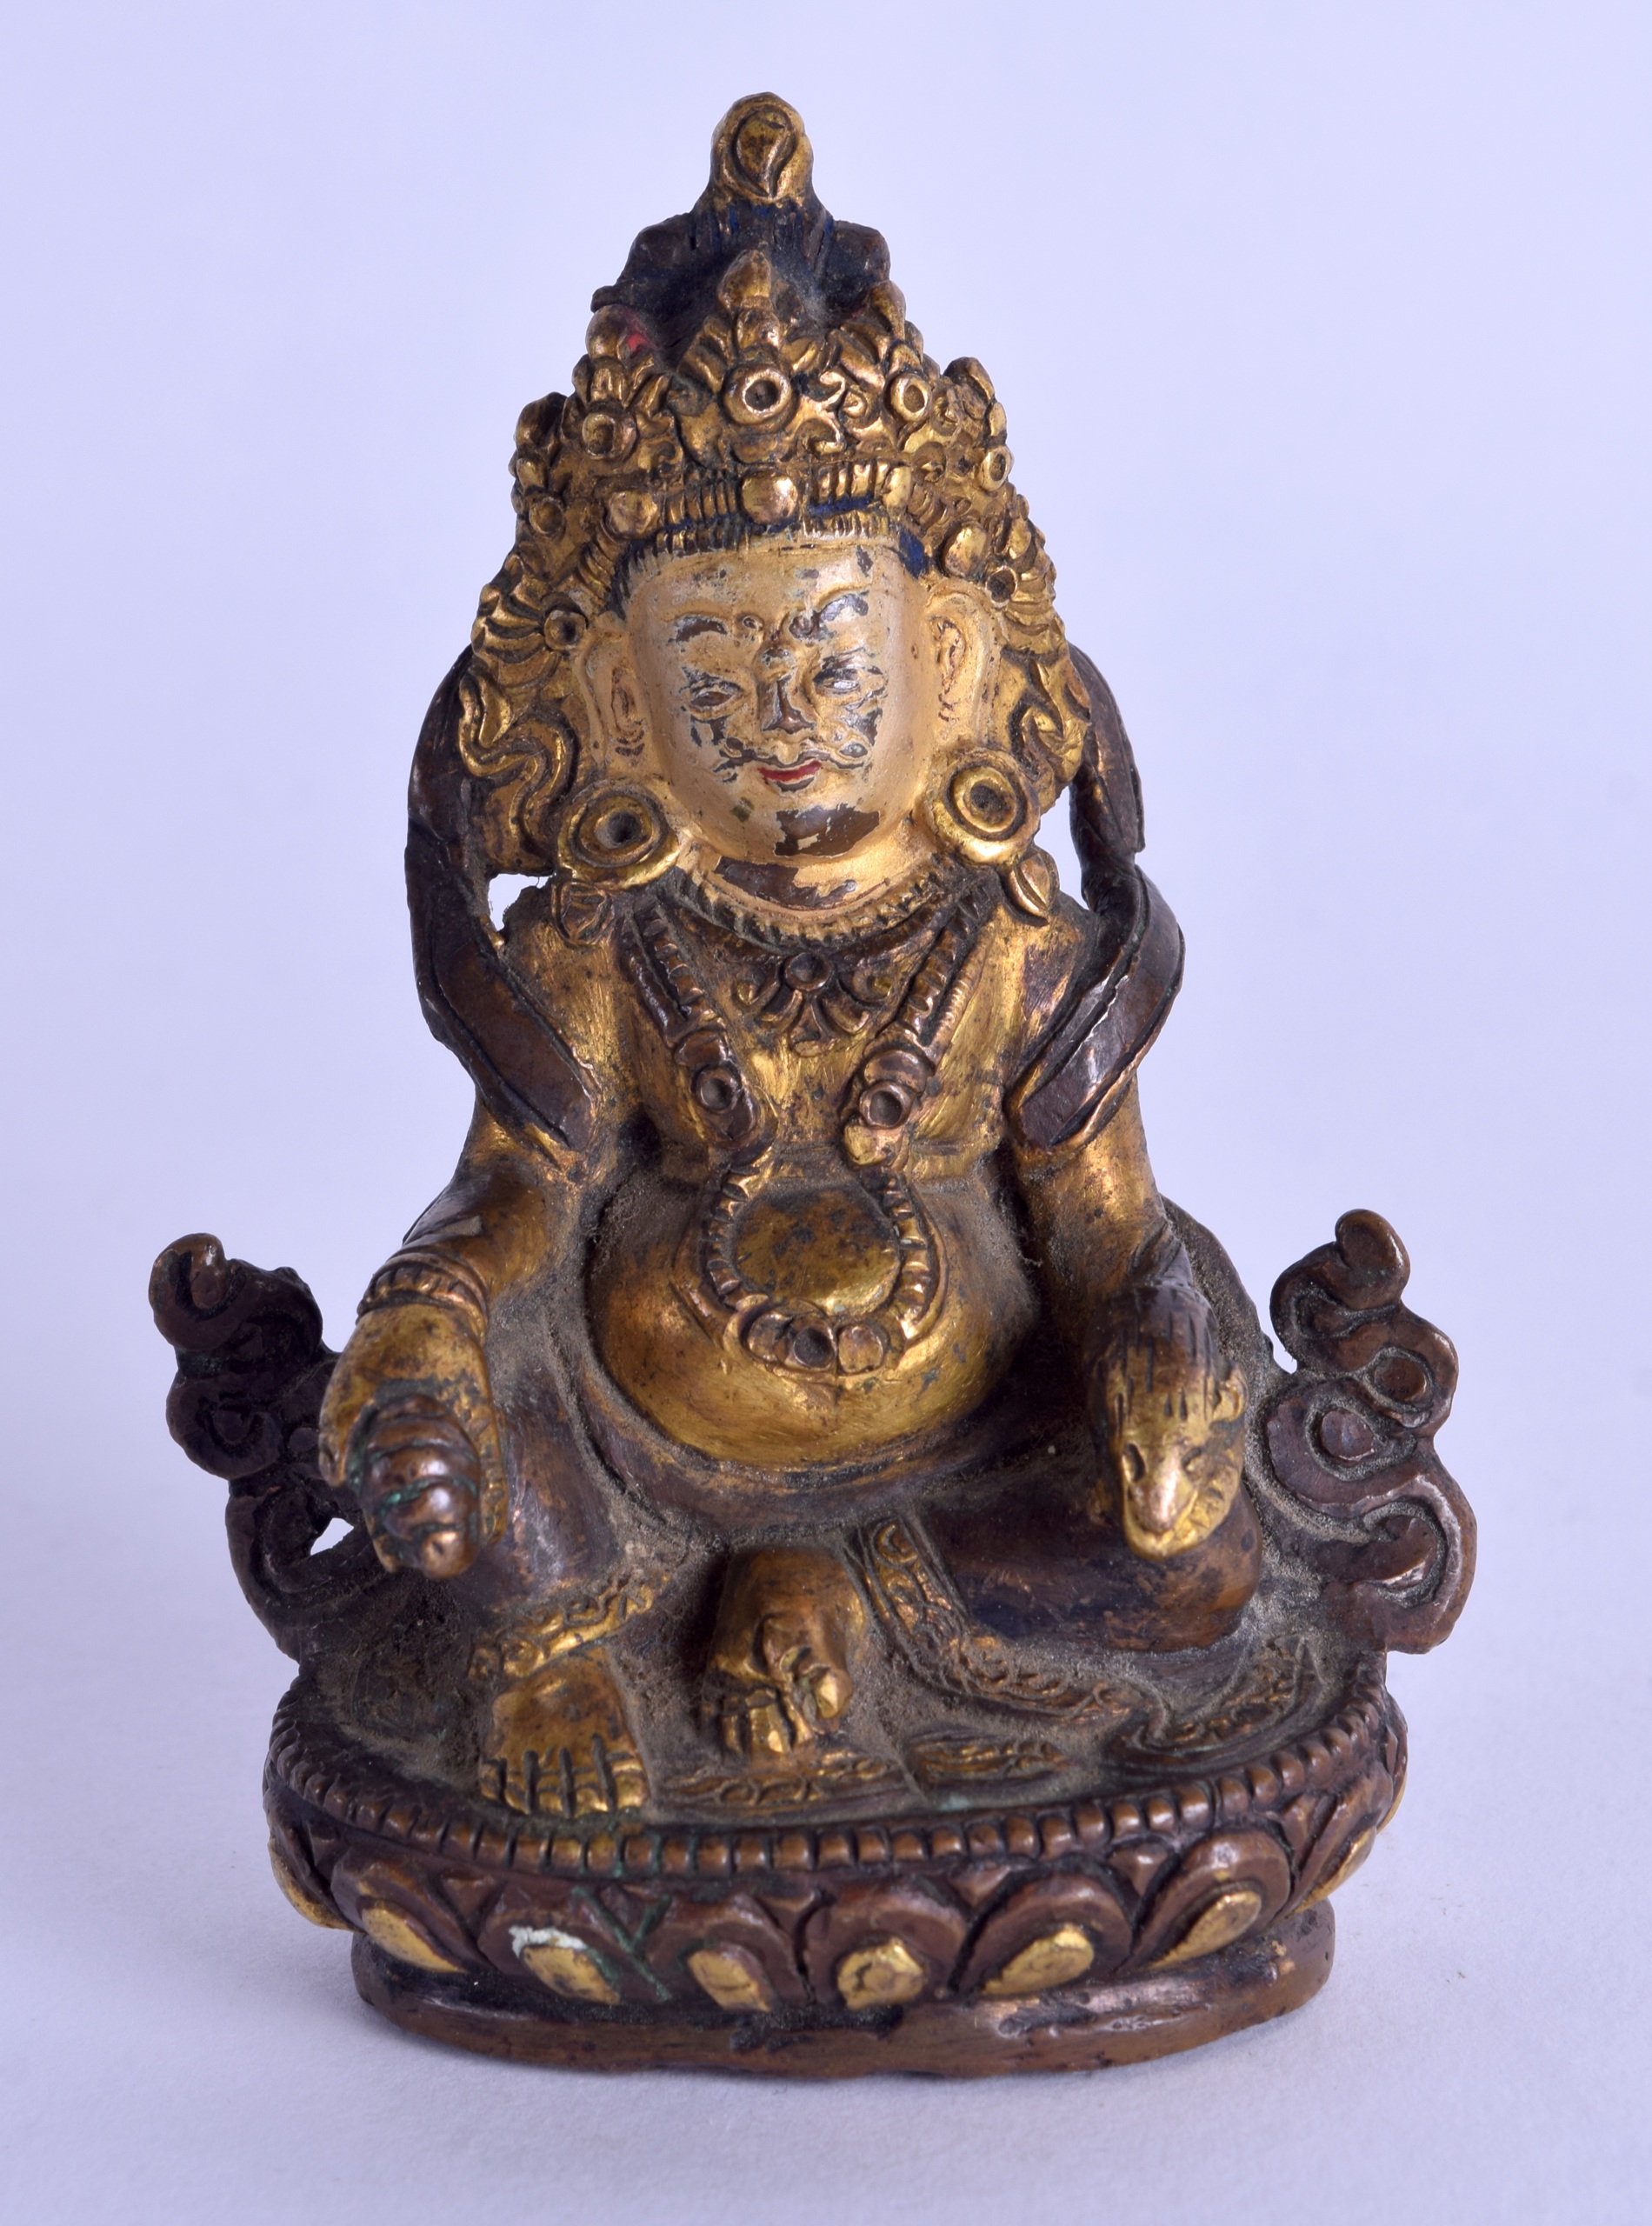 A LATE 19TH CENTURY CHINESE TIBETAN PAINTED BRONZE FIGURE OF A GOD modelled seated upon a lotus